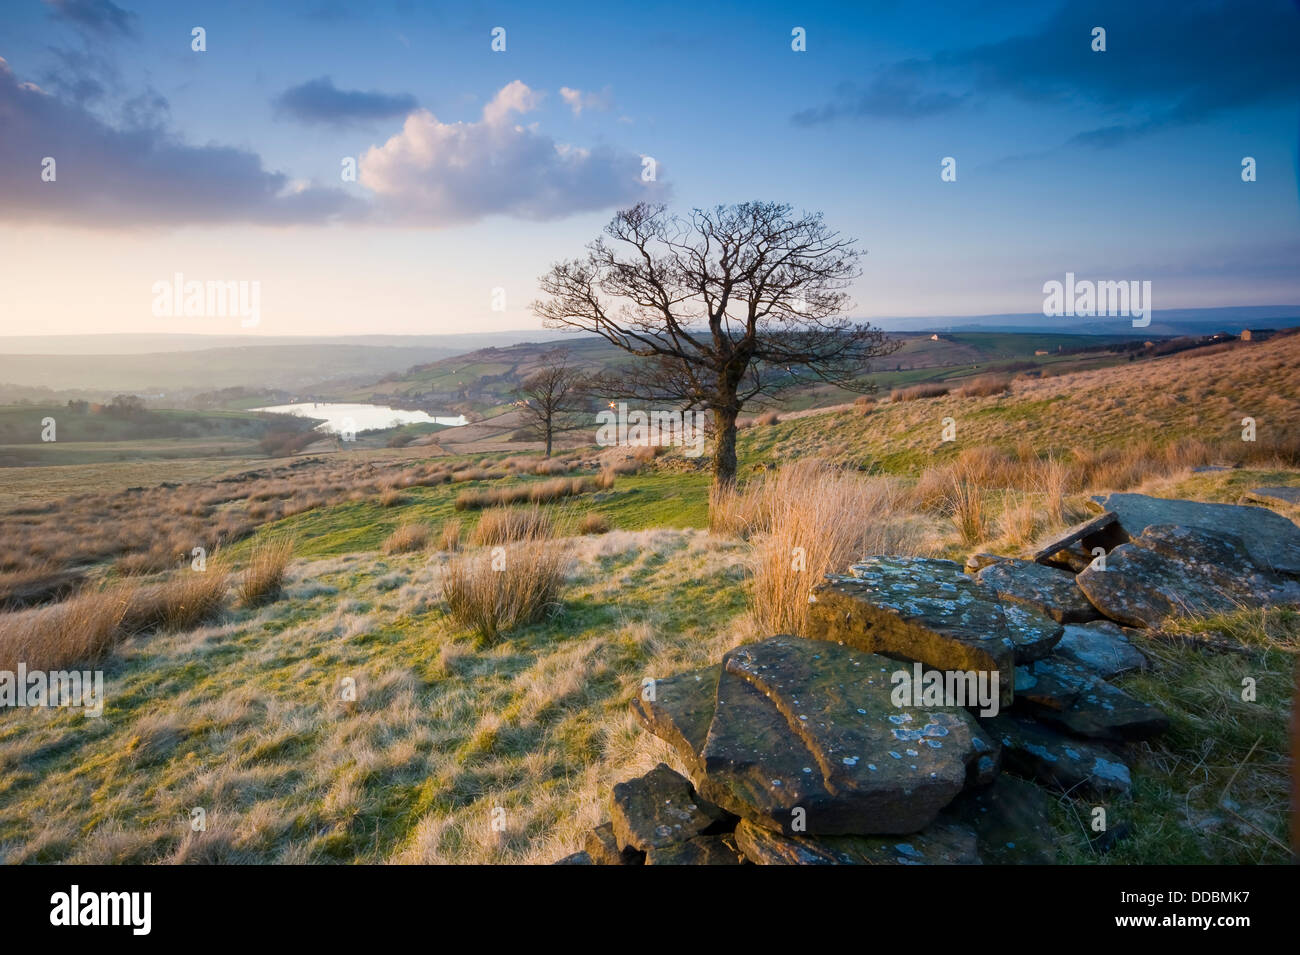 A landscape view over a typical Yorkshire Dales scene with dry stone wall in the foreground. Stock Photo